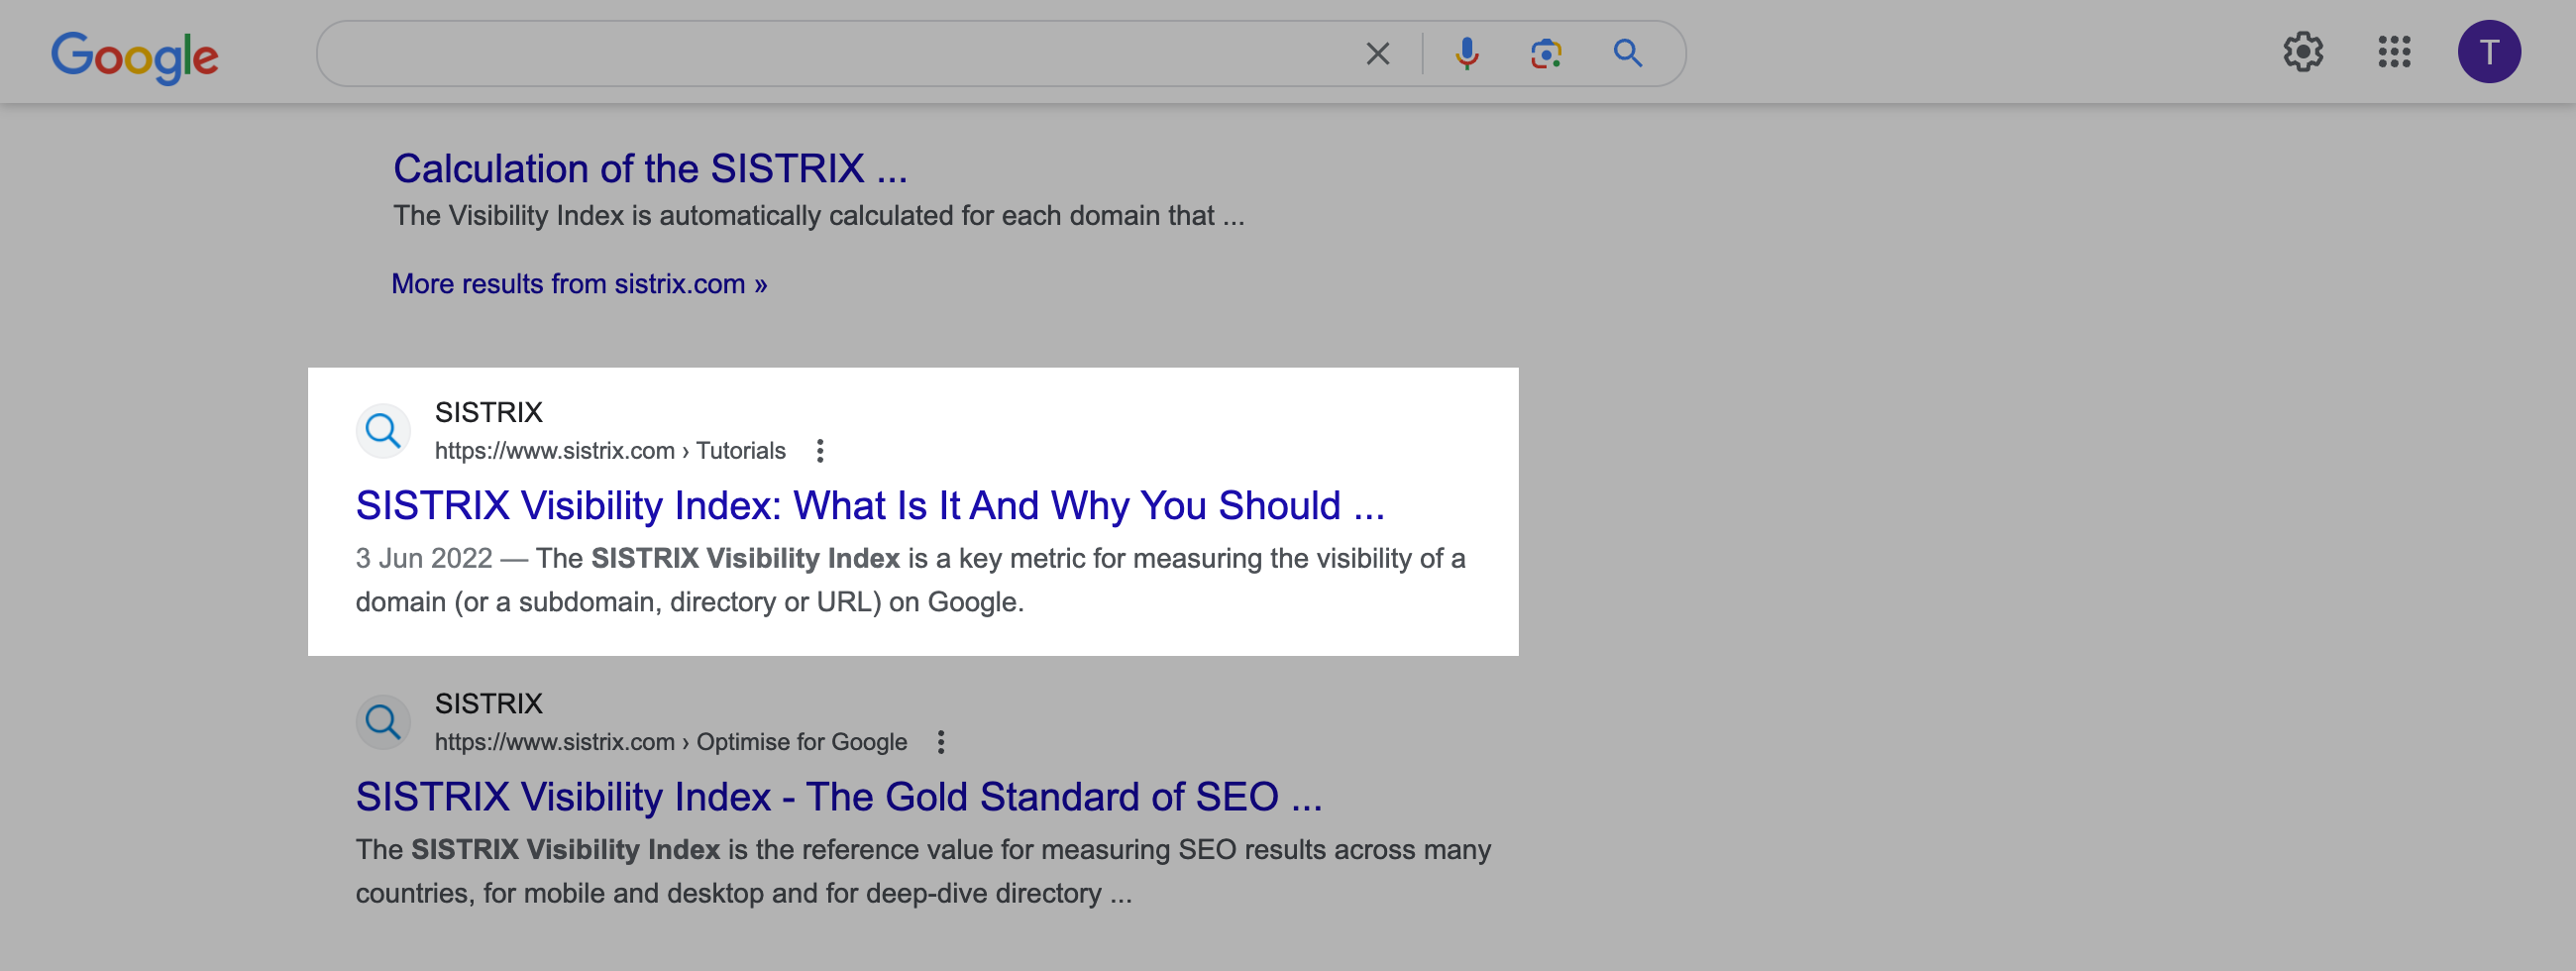 Search result in the Google SERPs. The title here has more than 59 characters and is cut off.